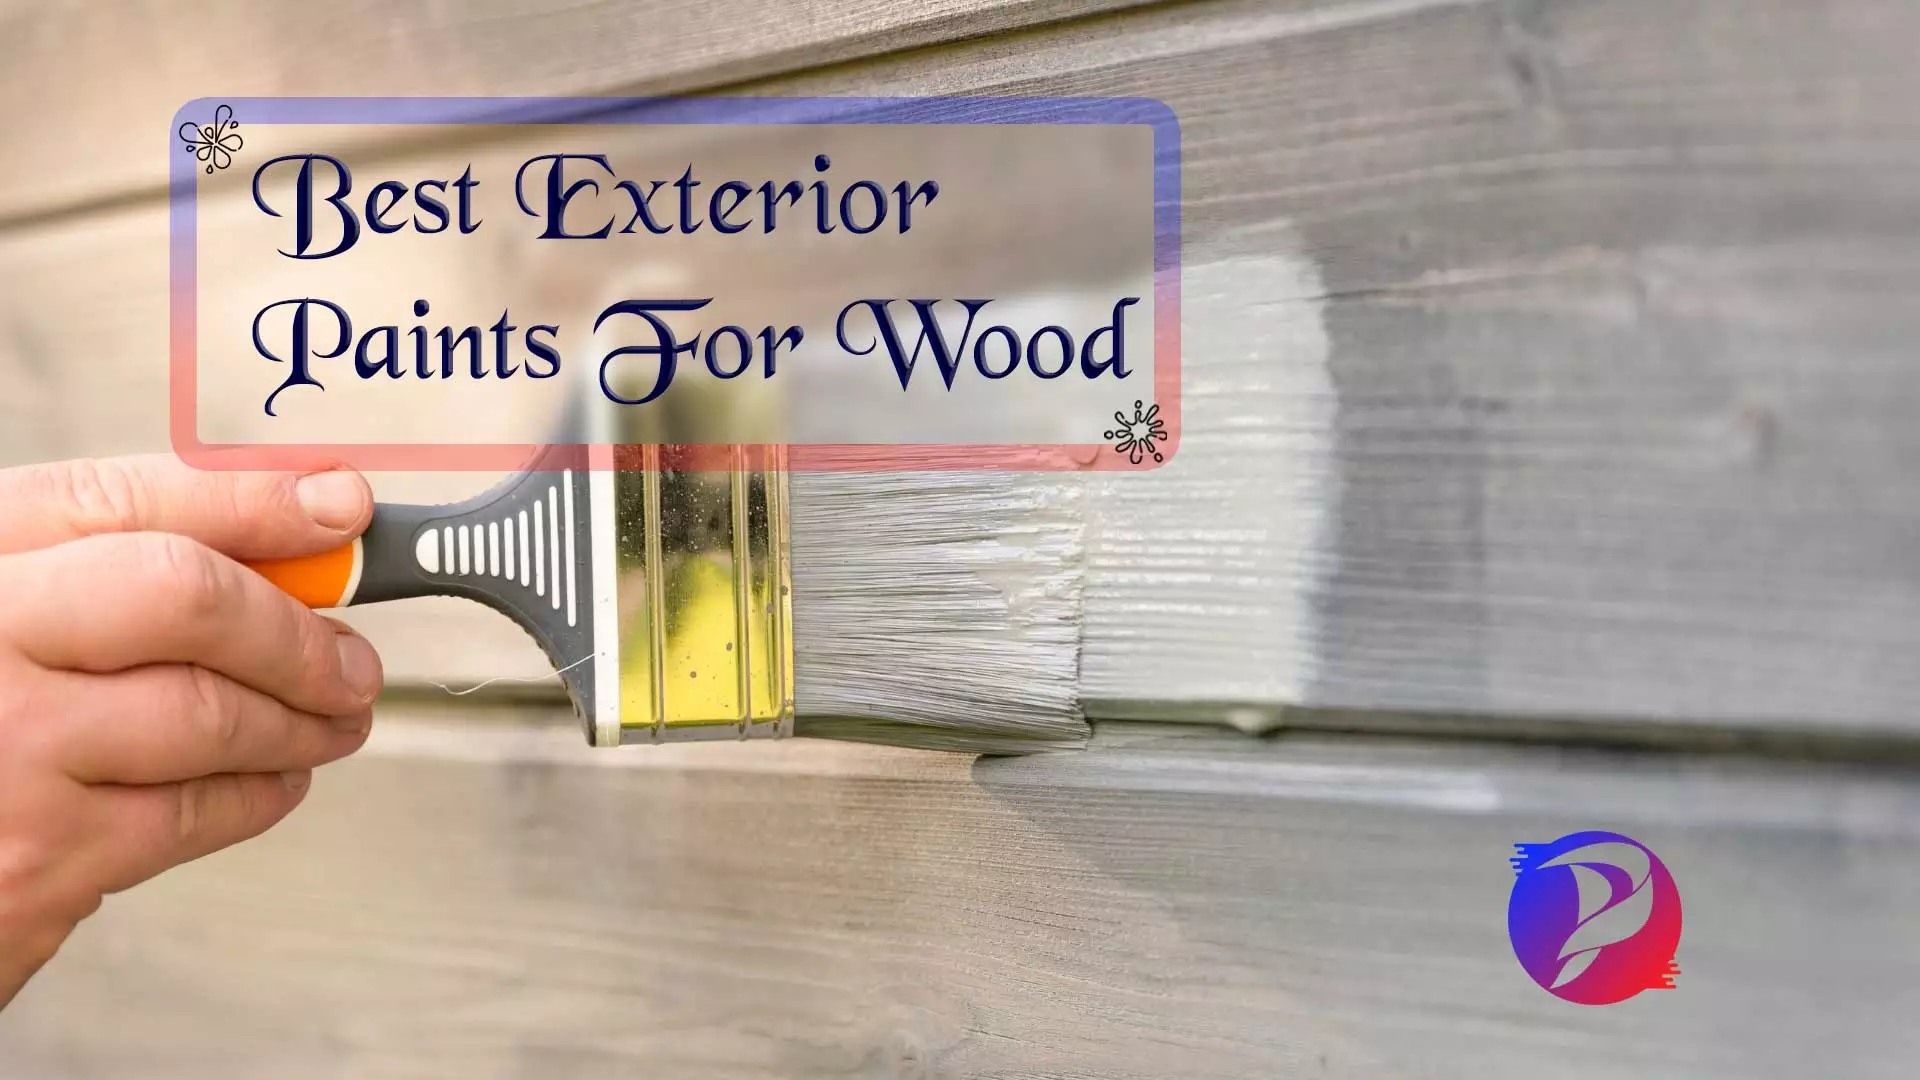 What is the best paint for exterior woodwork?